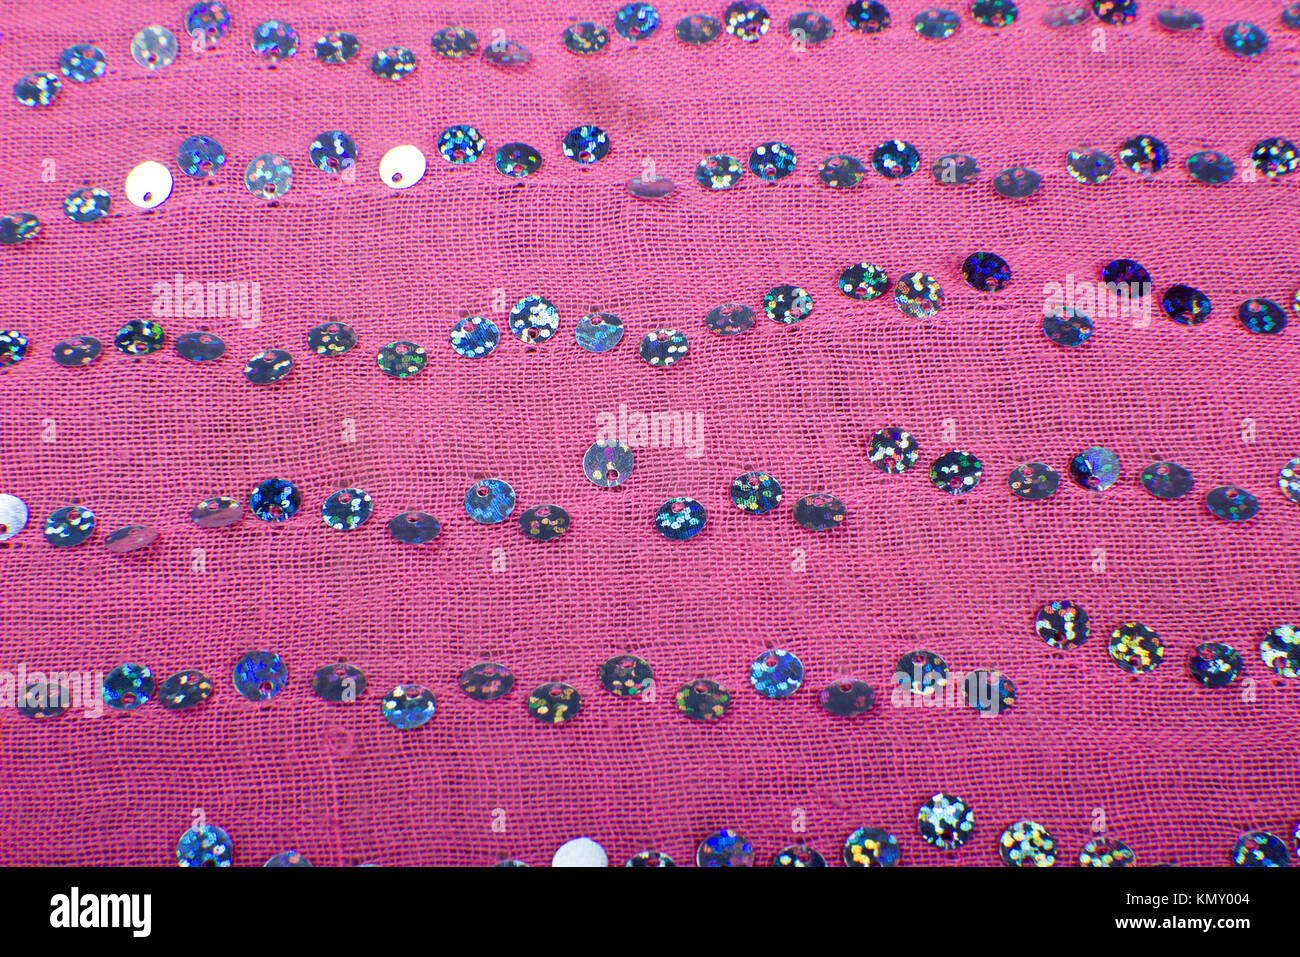 abstract background of a close up portrait of sequined pink fabric scarf Stock Photo